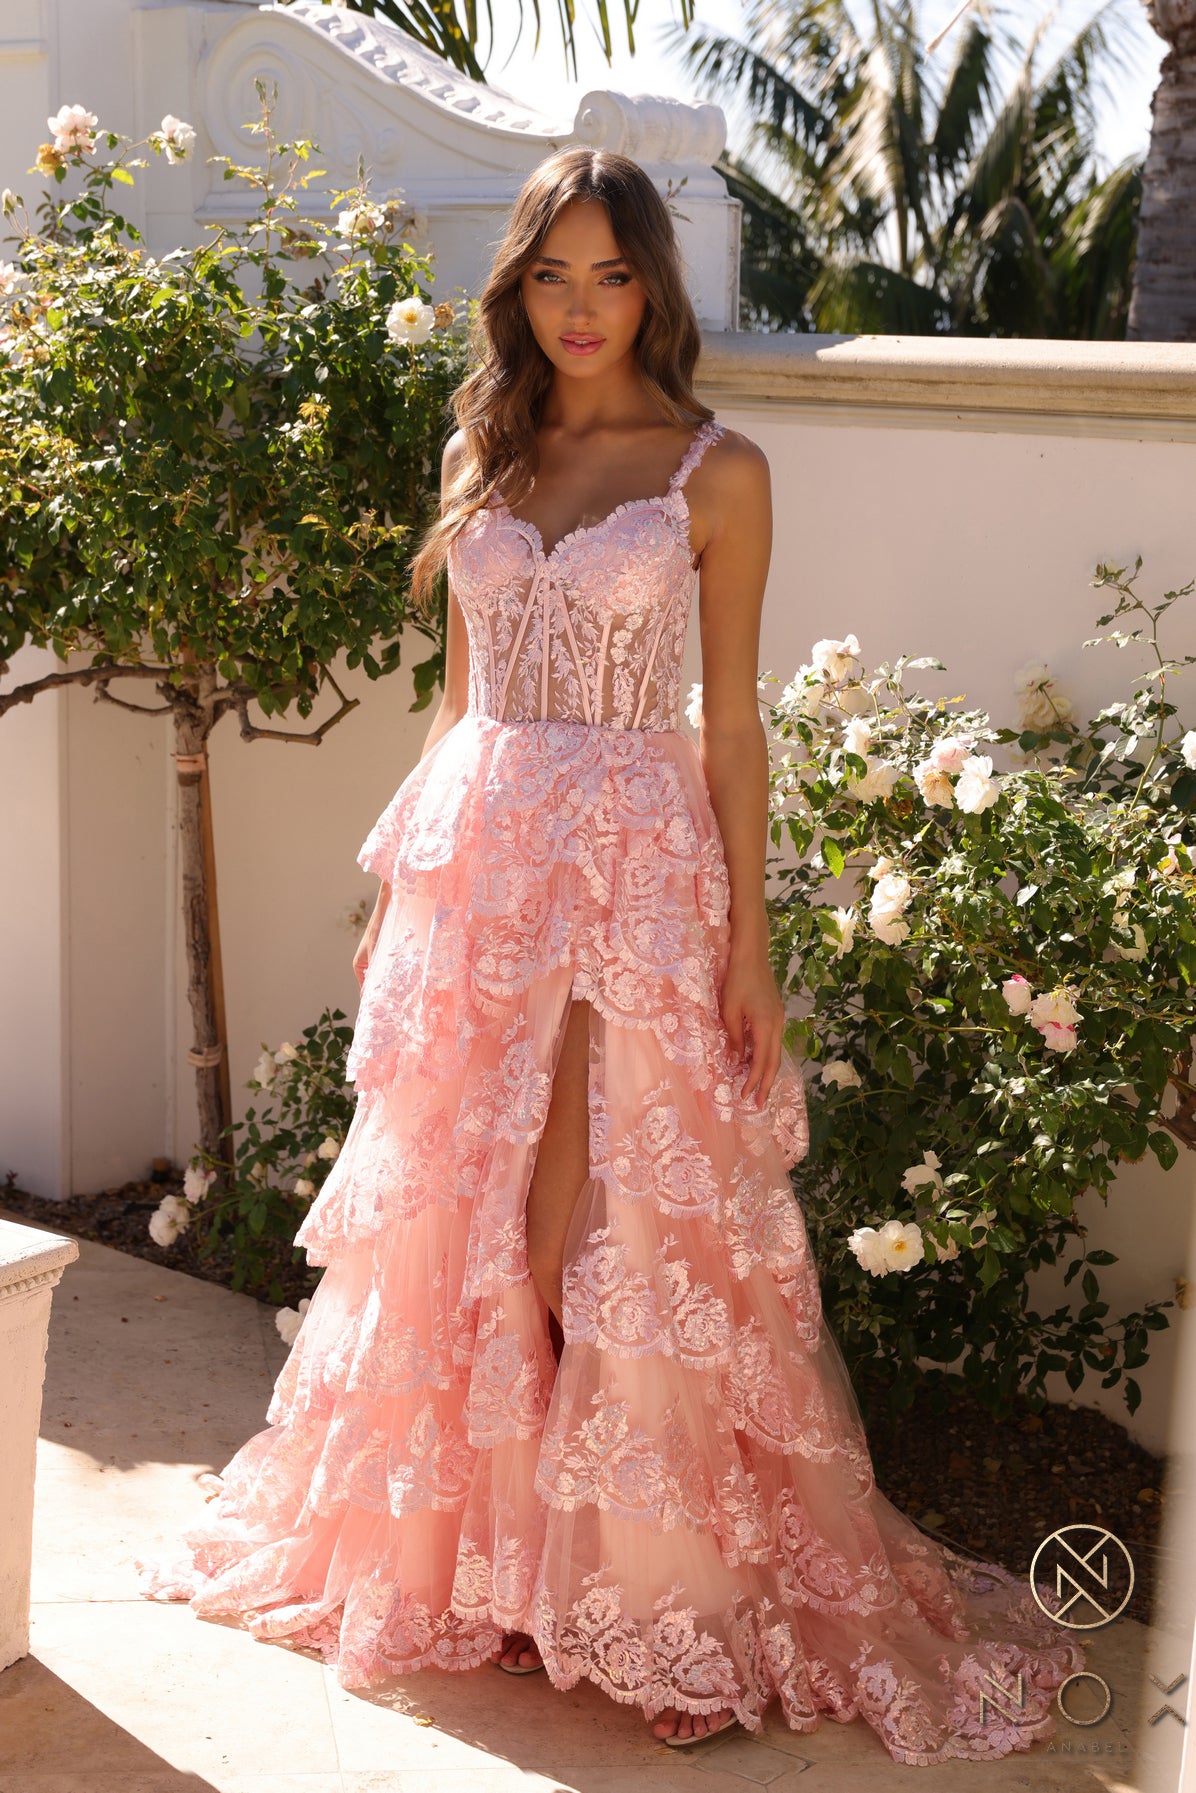 Nox Anabel R1299 Ruffle Lace High Slit Skirt Prom Dress Corset Sequin off the shoulder Formal Gown